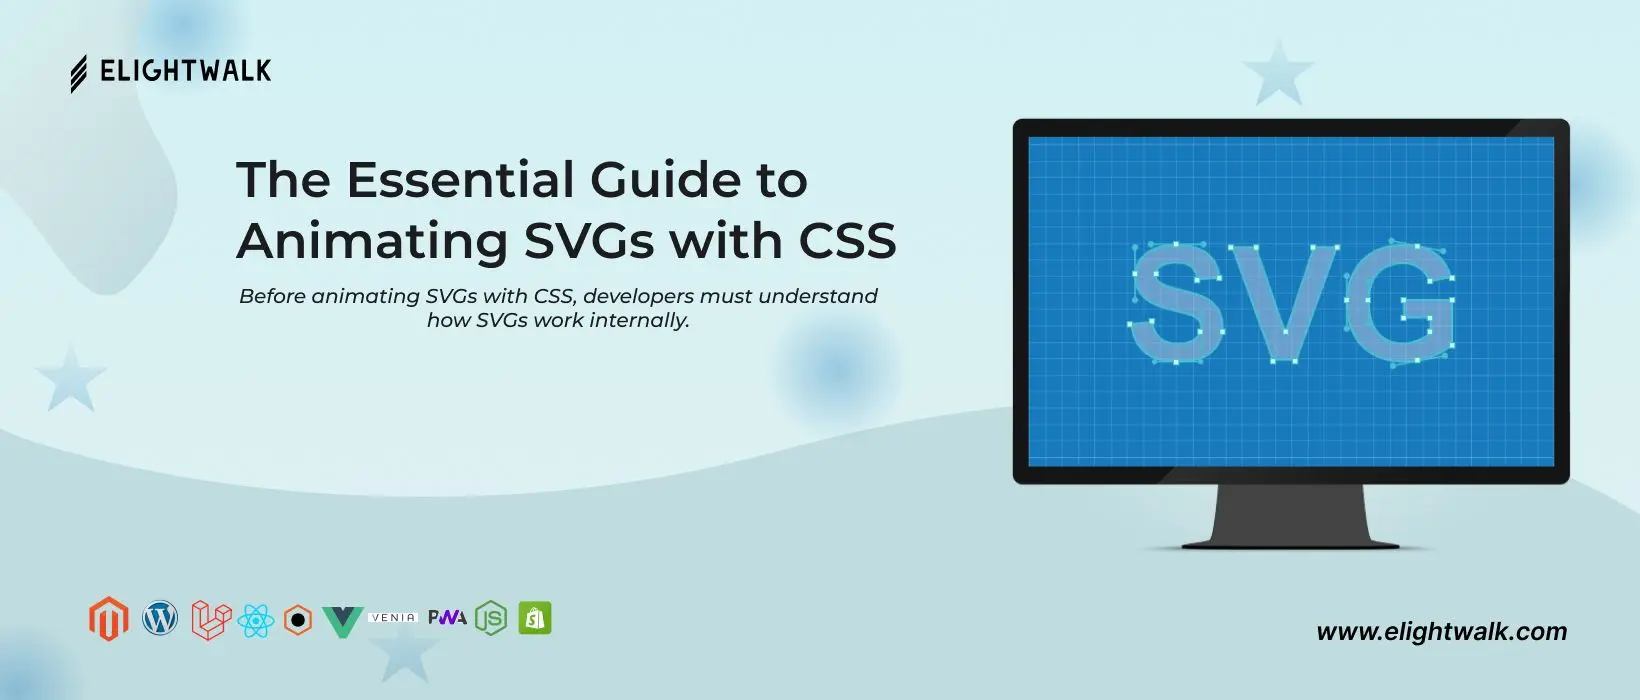 The Essential Guide to Animating SVGs with CSS